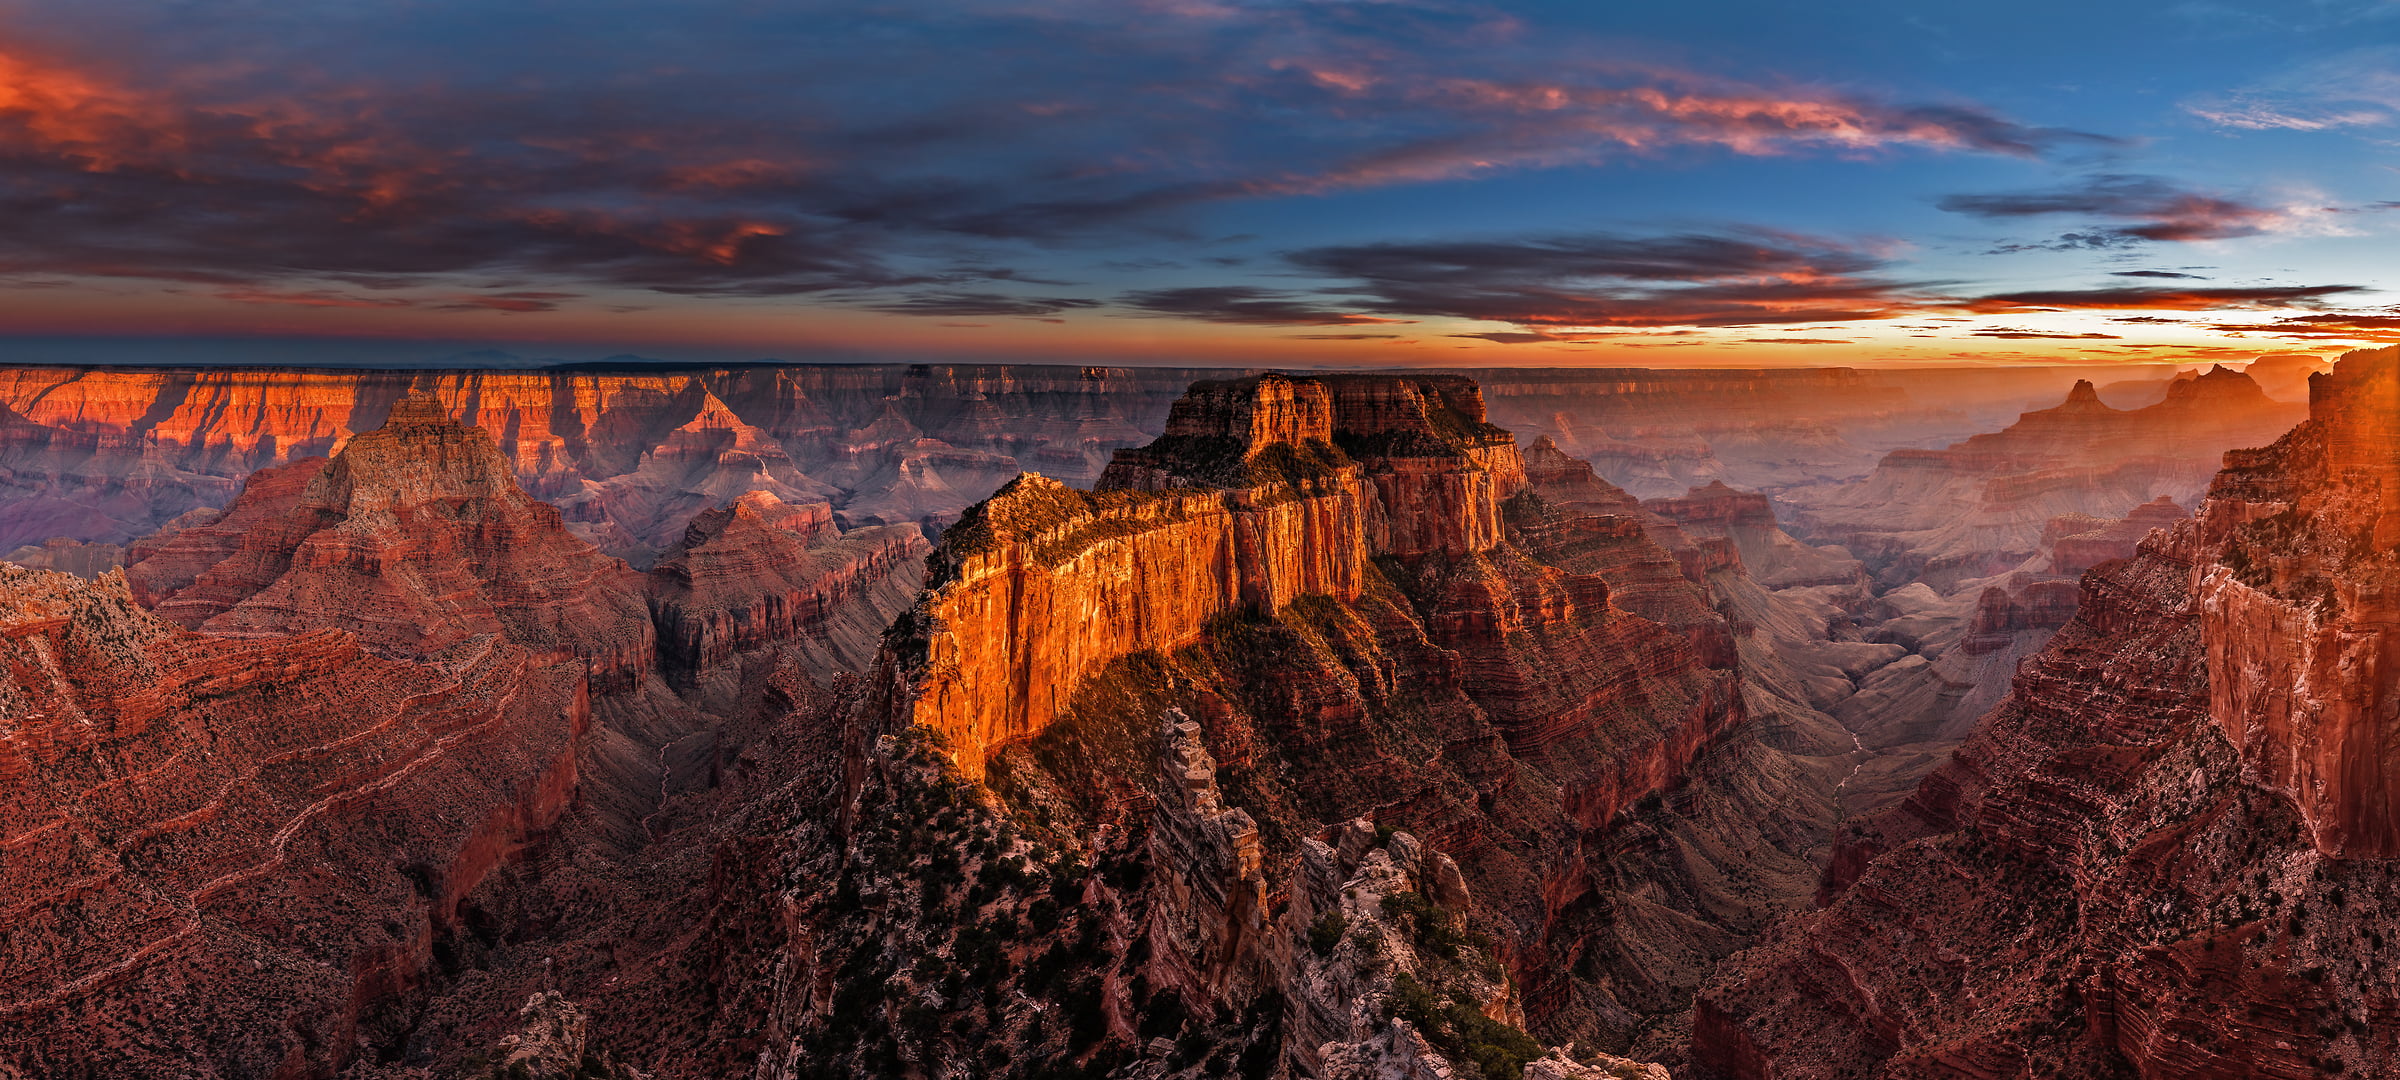 508 megapixels! A very high resolution, large-format VAST photo print of the Grand Canyon at sunset; fine art landscape photo created by Chris Collacott in Grand Canyon National Park, Arizona